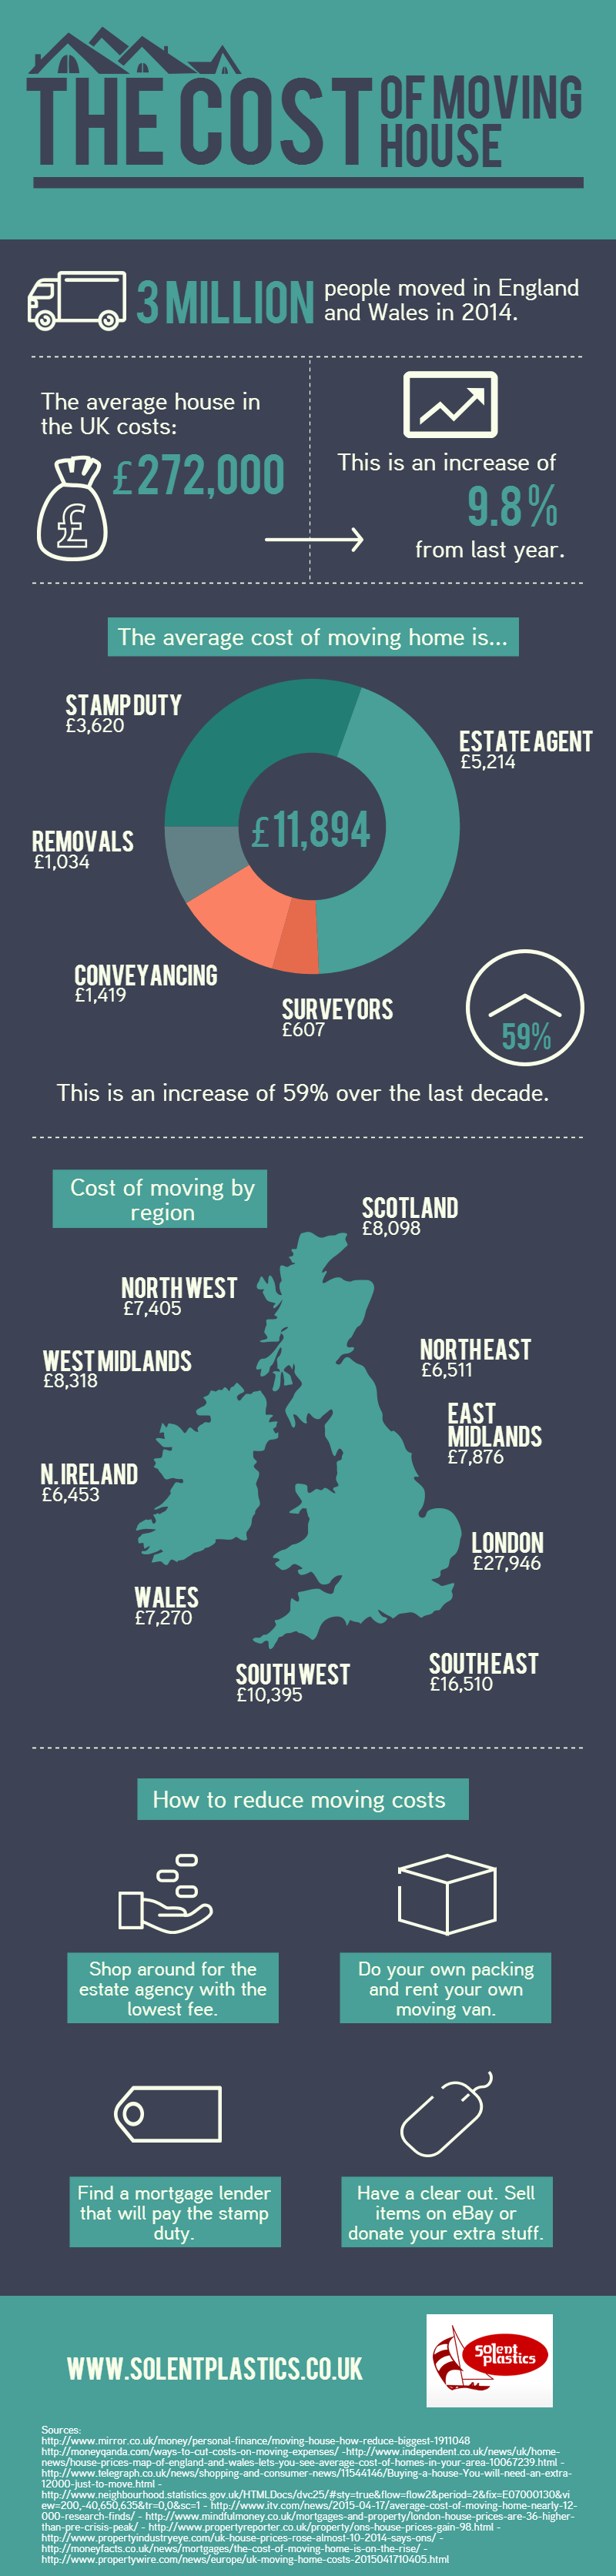 The Cost of Moving House